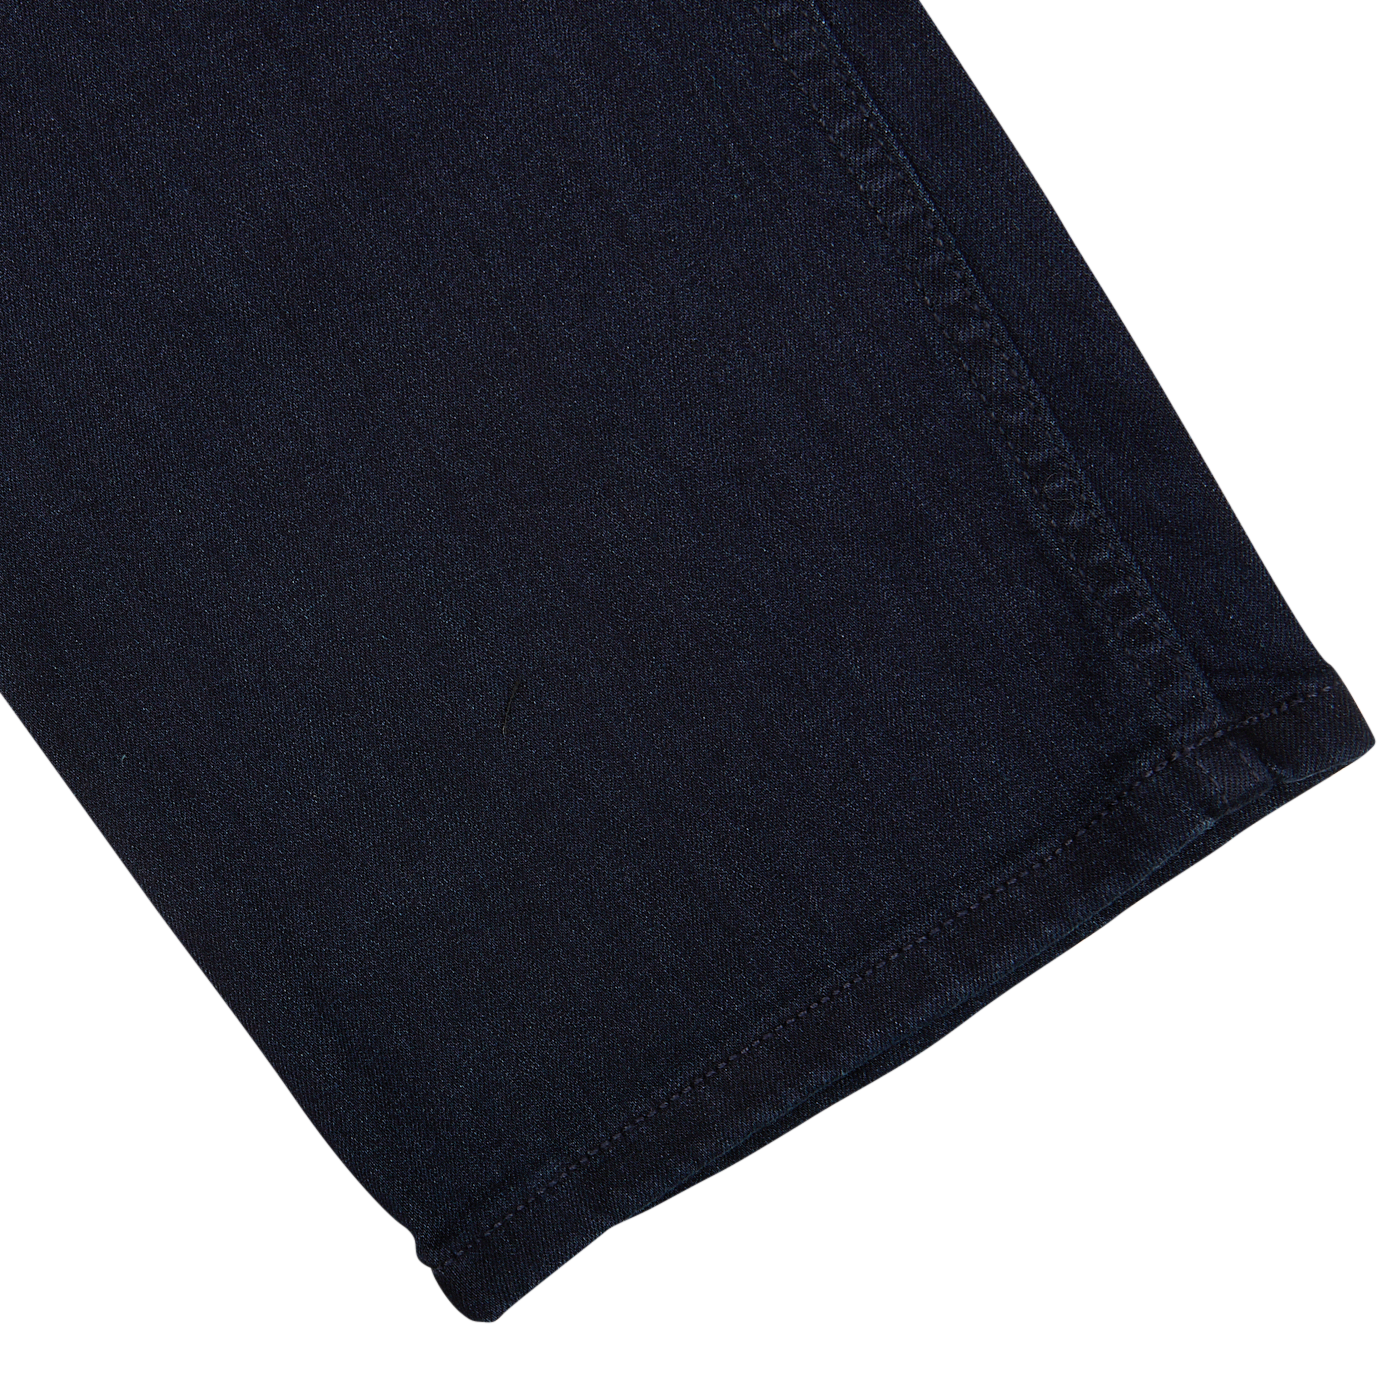 A close-up of a Paige Inkwell Blue Cotton Transcend Normandie Jeans with a visible seam and hem,possibly a part of regular fit jeans.